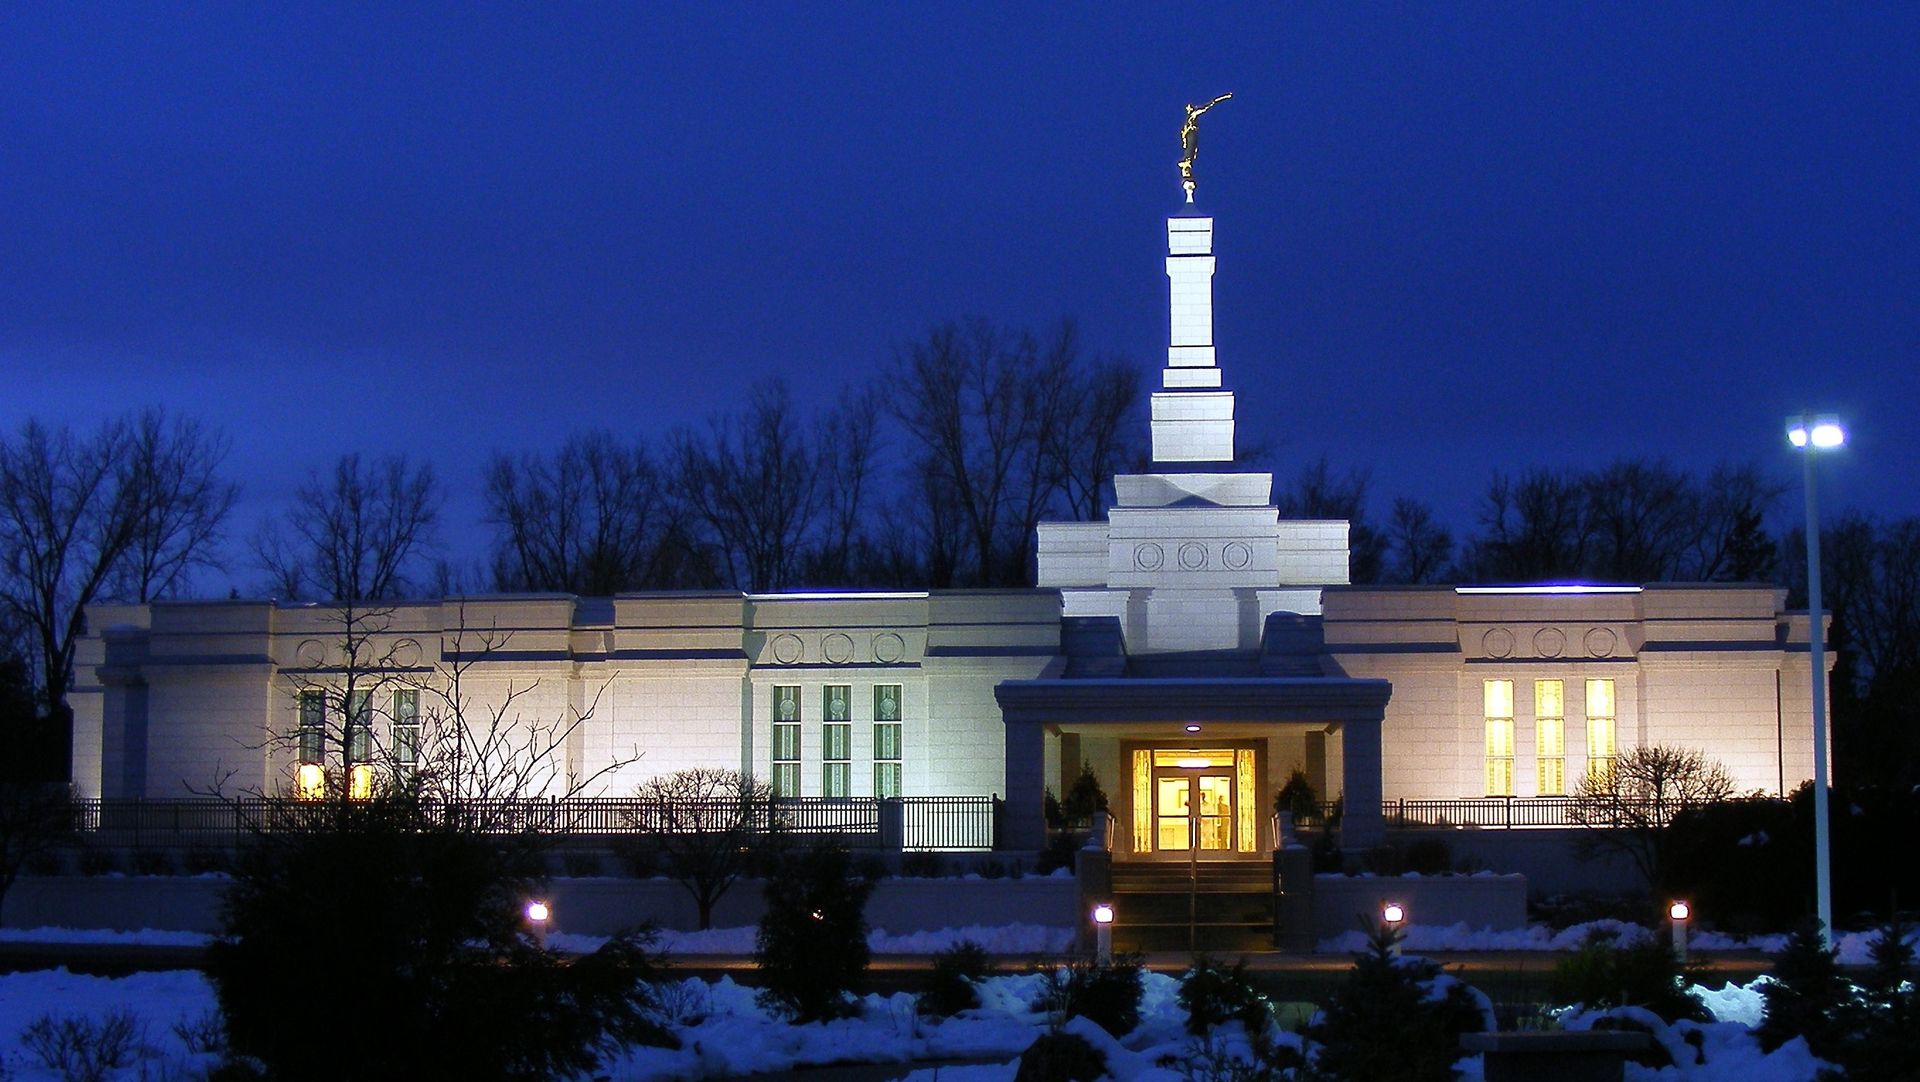 The St. Paul Minnesota Temple in the evening during the winter.